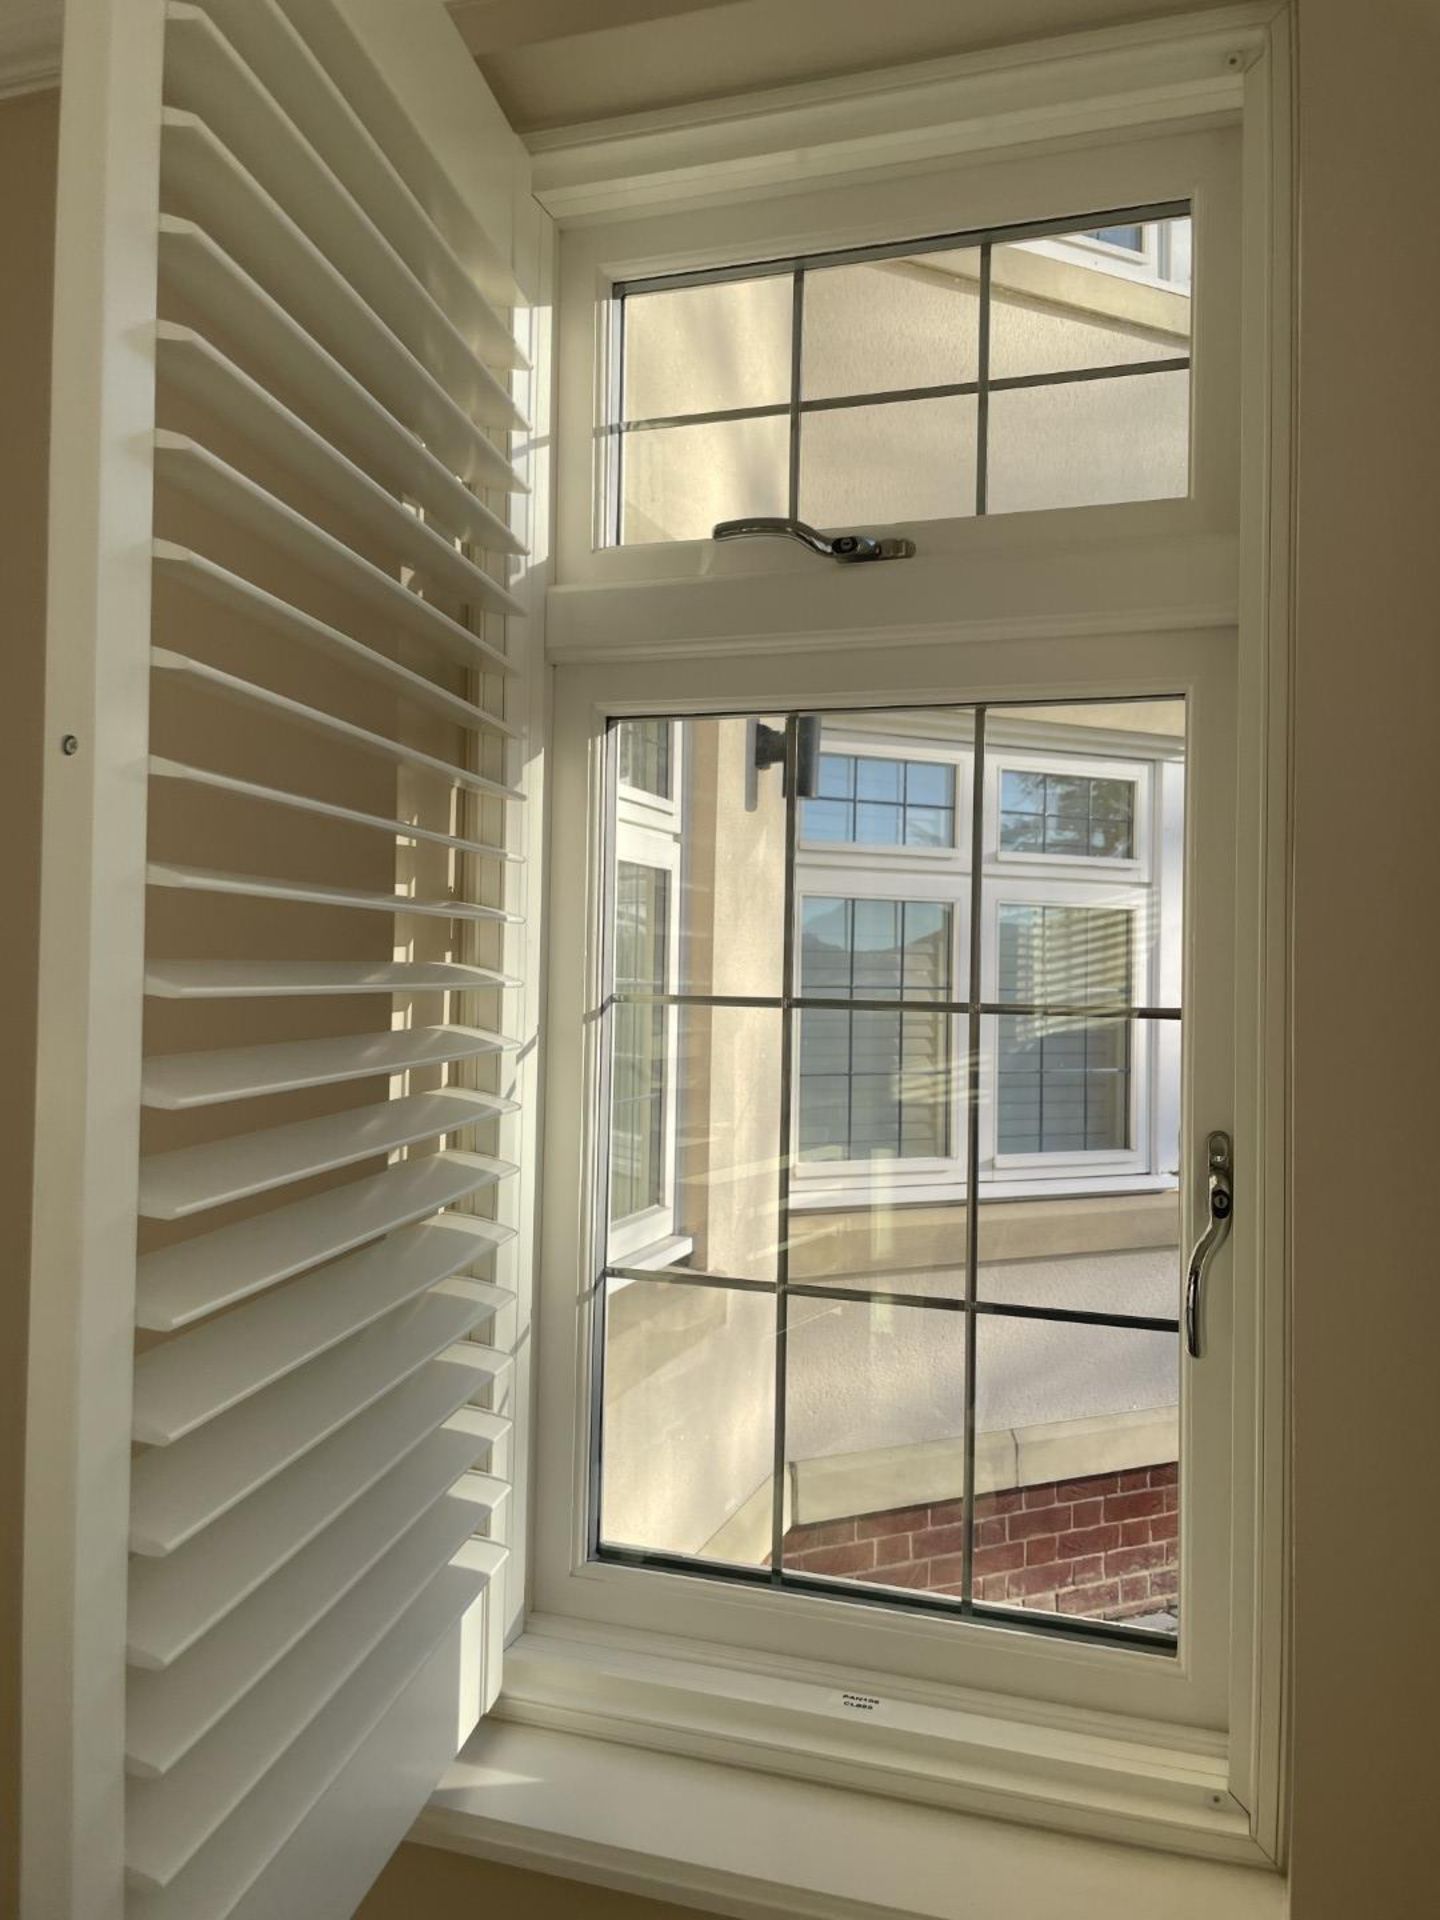 1 x Hardwood Timber Double Glazed Window Frames fitted with Shutter Blinds, In White - Ref: PAN106 - Image 13 of 23